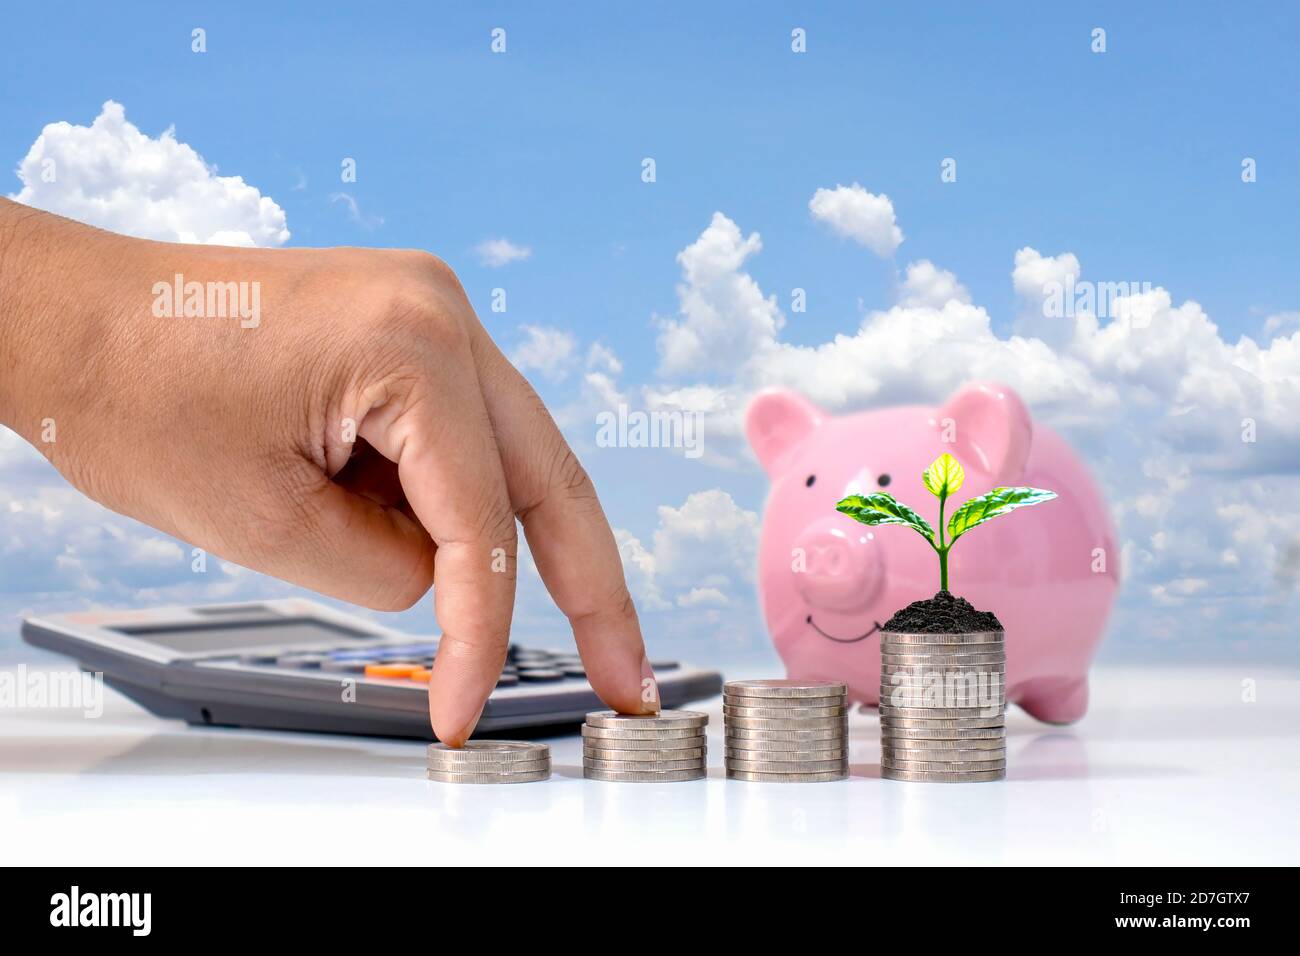 The male investor's hand rests on a pile of flat coins leap and trees on the coin pile of money-saving ideas business growth. Stock Photo